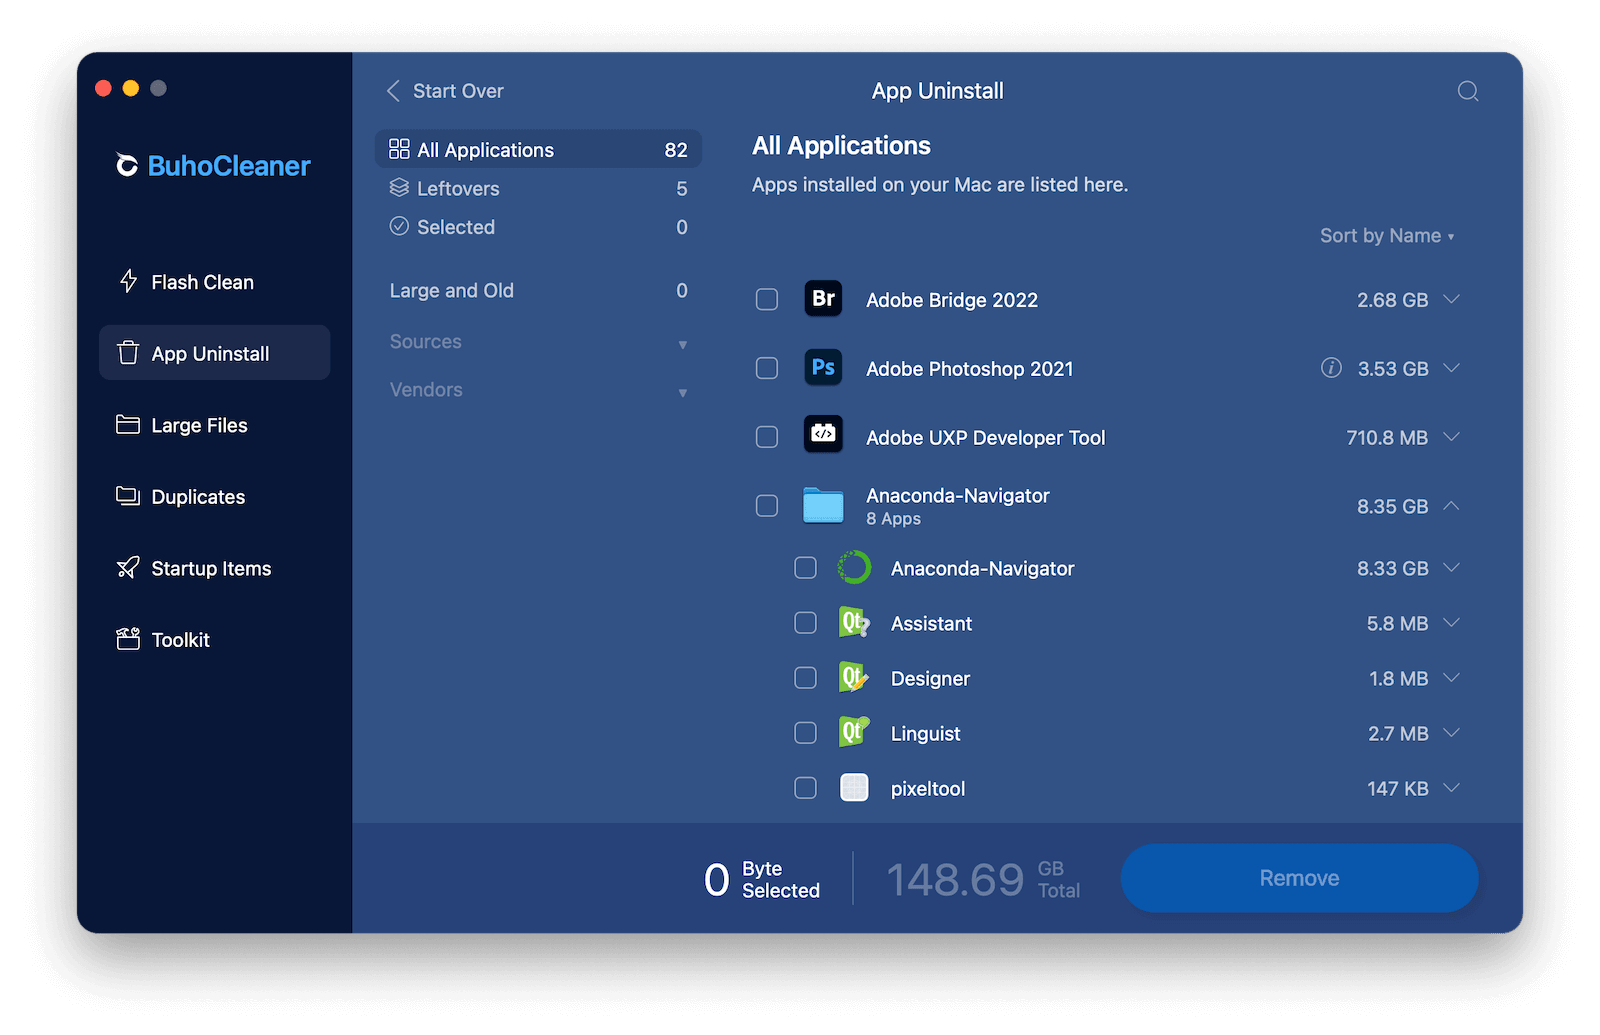 Uninstall Unwanted Apps Using BuhoCleaner